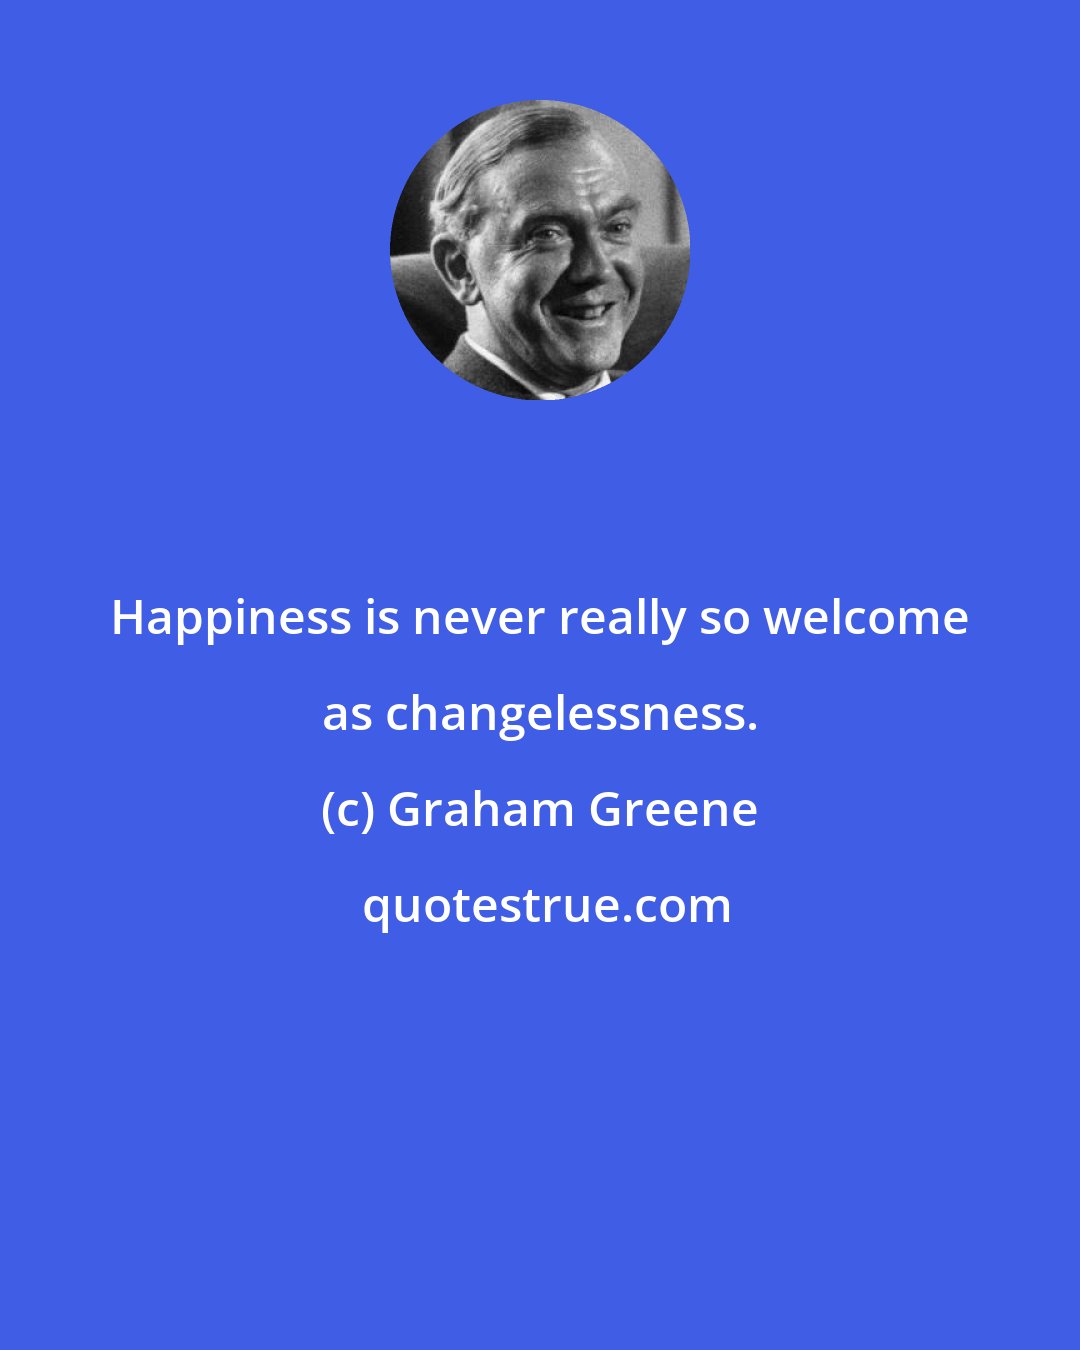 Graham Greene: Happiness is never really so welcome as changelessness.